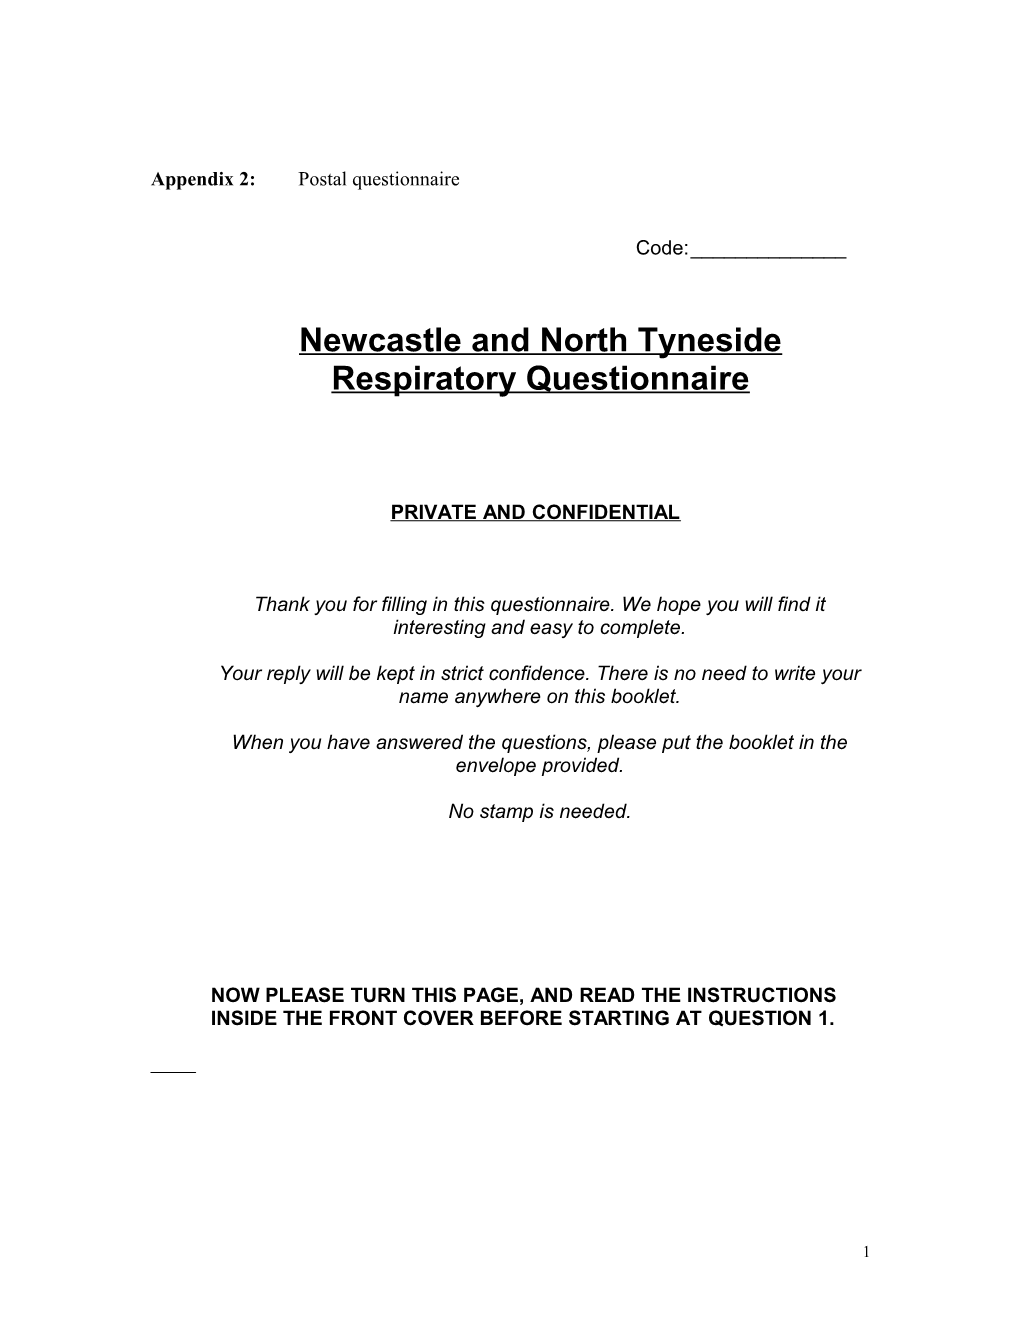 Newcastle and North Tyneside Respiratory Questionnaire